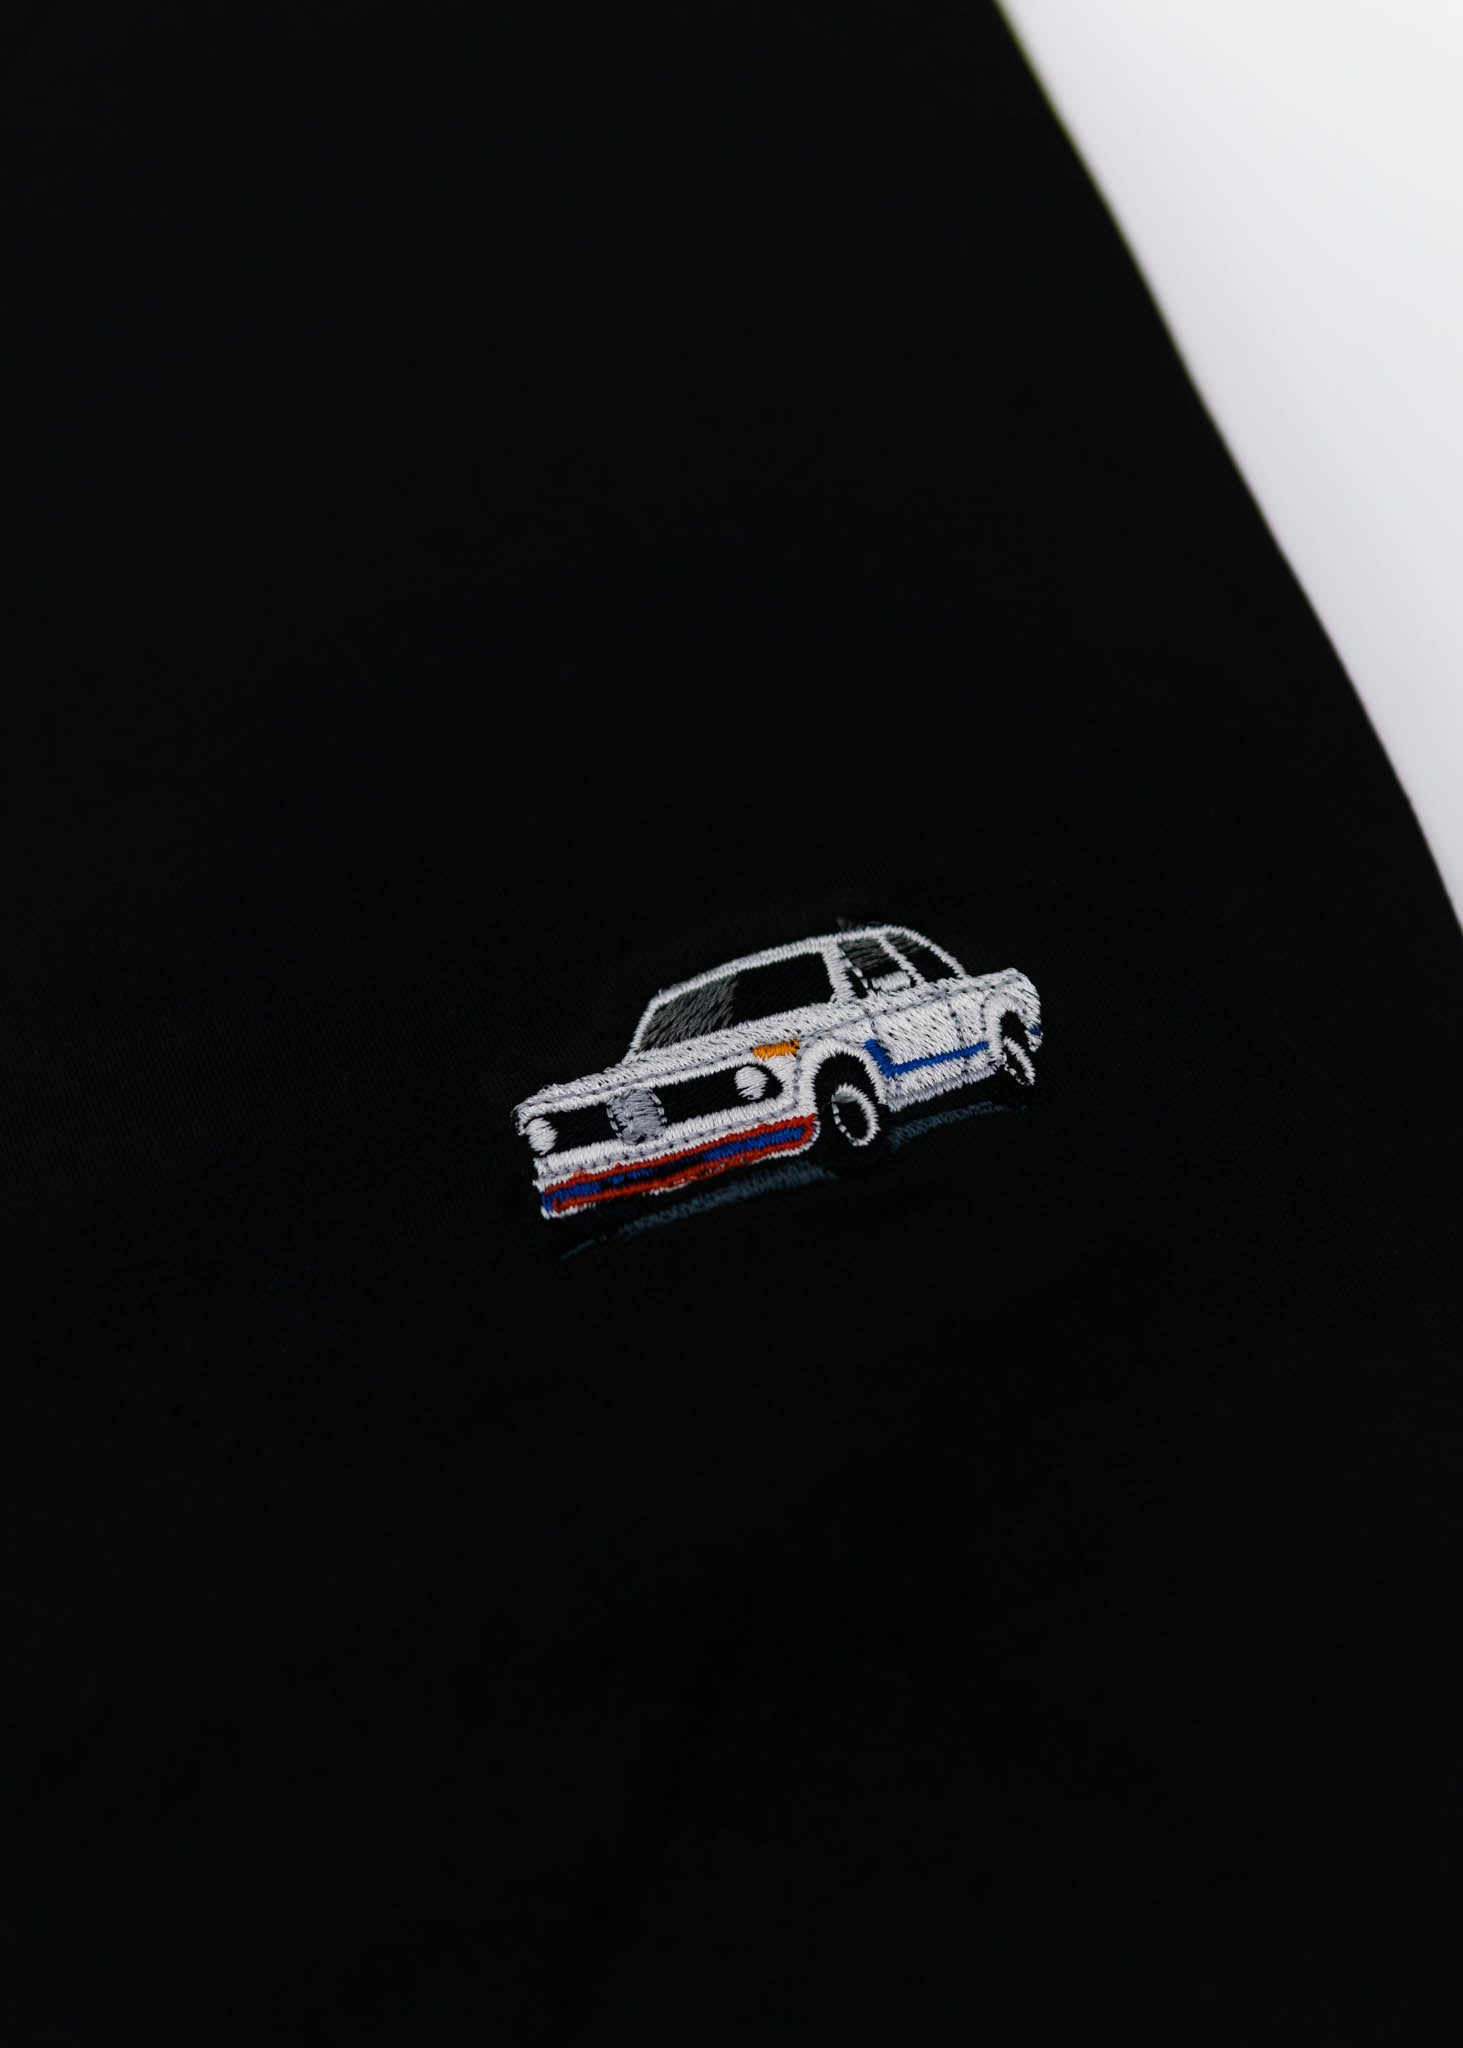 A black BMW 2002 Turbo t-shirt for men. Photo is a close up view of the shirt with an embroidered 2002 Turbo. Fabric composition is a polyester and cotton mix. The material is very soft, stretchy, non-transparent. The style of this shirt is short sleeve, with a crewneck neckline.